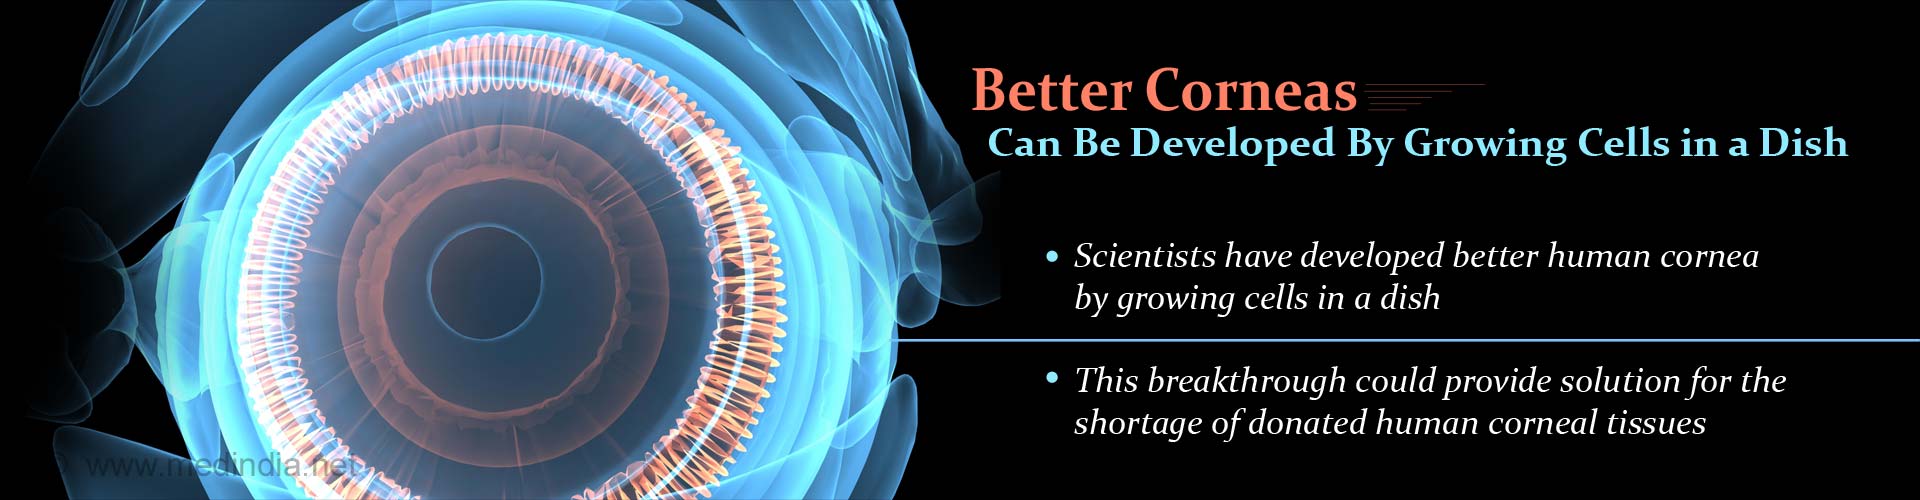 Better corneas can be developed by growing cells in a dish
- Scientists have developed better human cornea by growing cells ina  dish
- This breakthrough could provide solution for the shortage of donated human corneal tissues